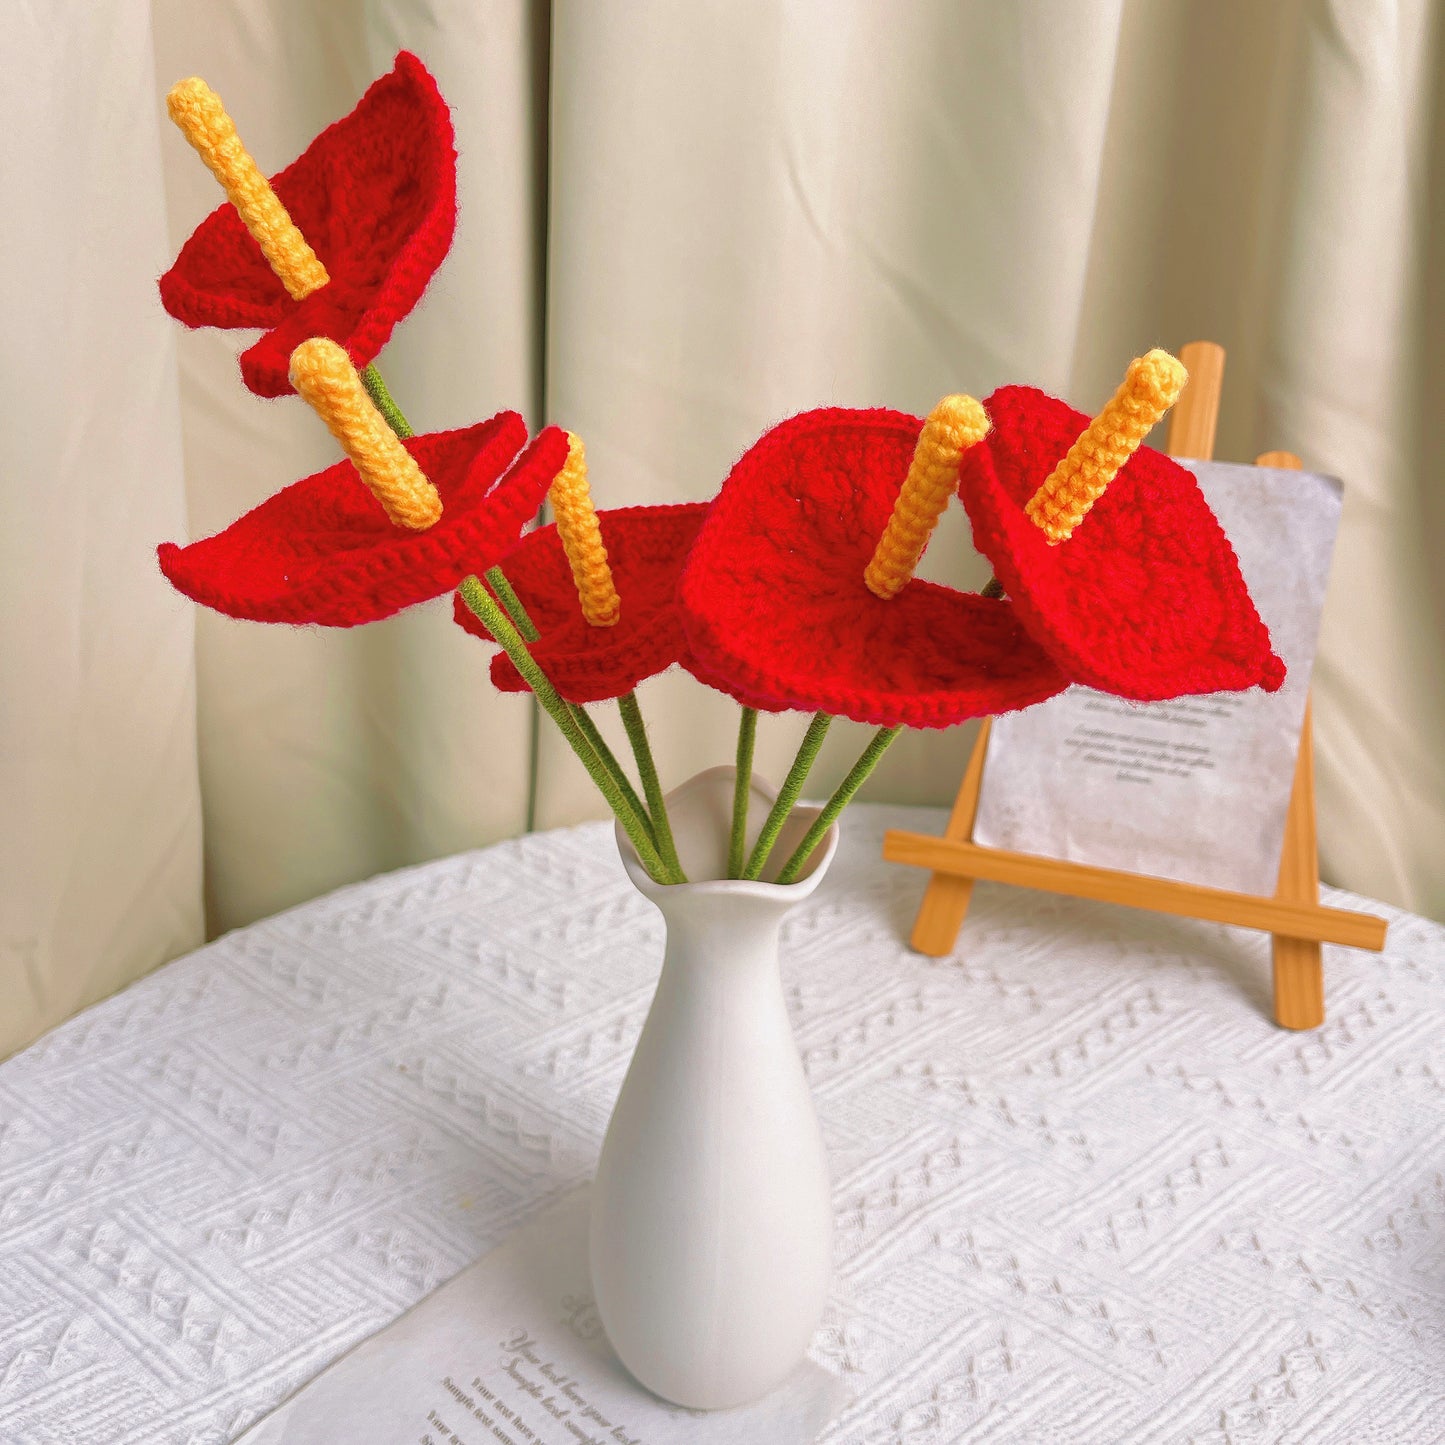 Handmade Crocheted Red Anthurium: A Symbol of Prosperity and Joy